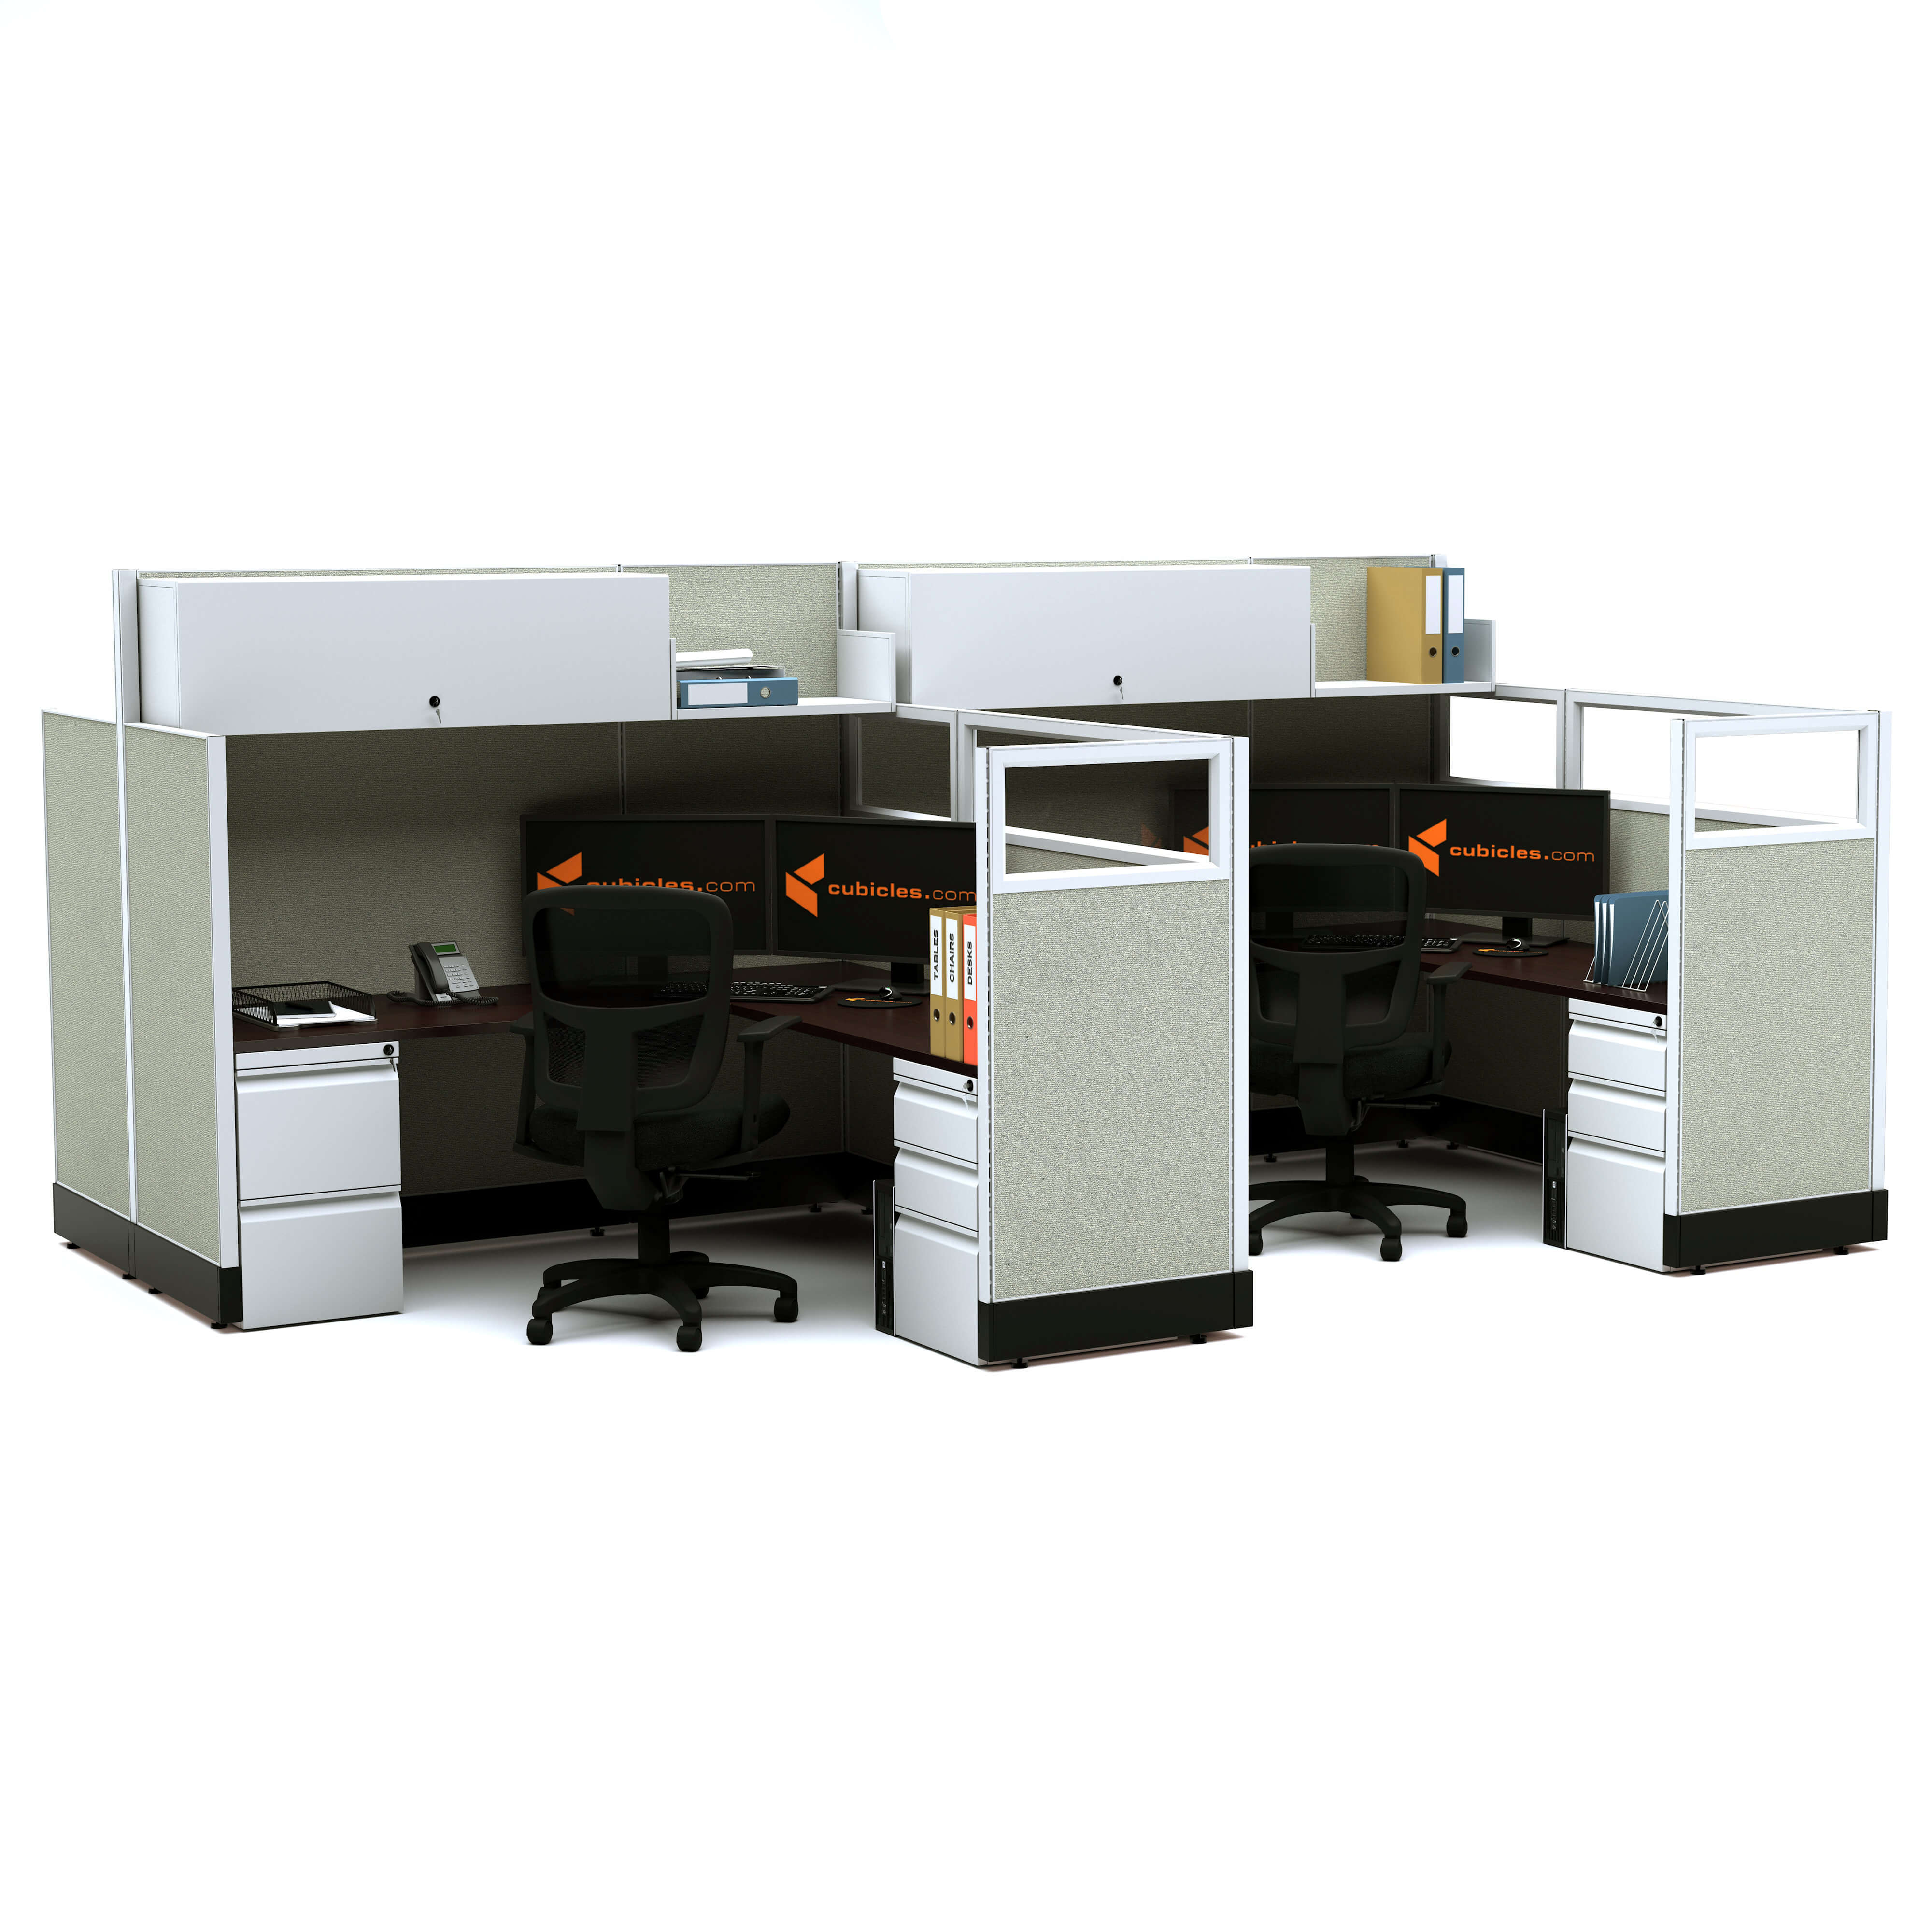 modular-office-furniture-partial-glass-office-cubicles-53-67h-4pack-cluster-powered.jpg